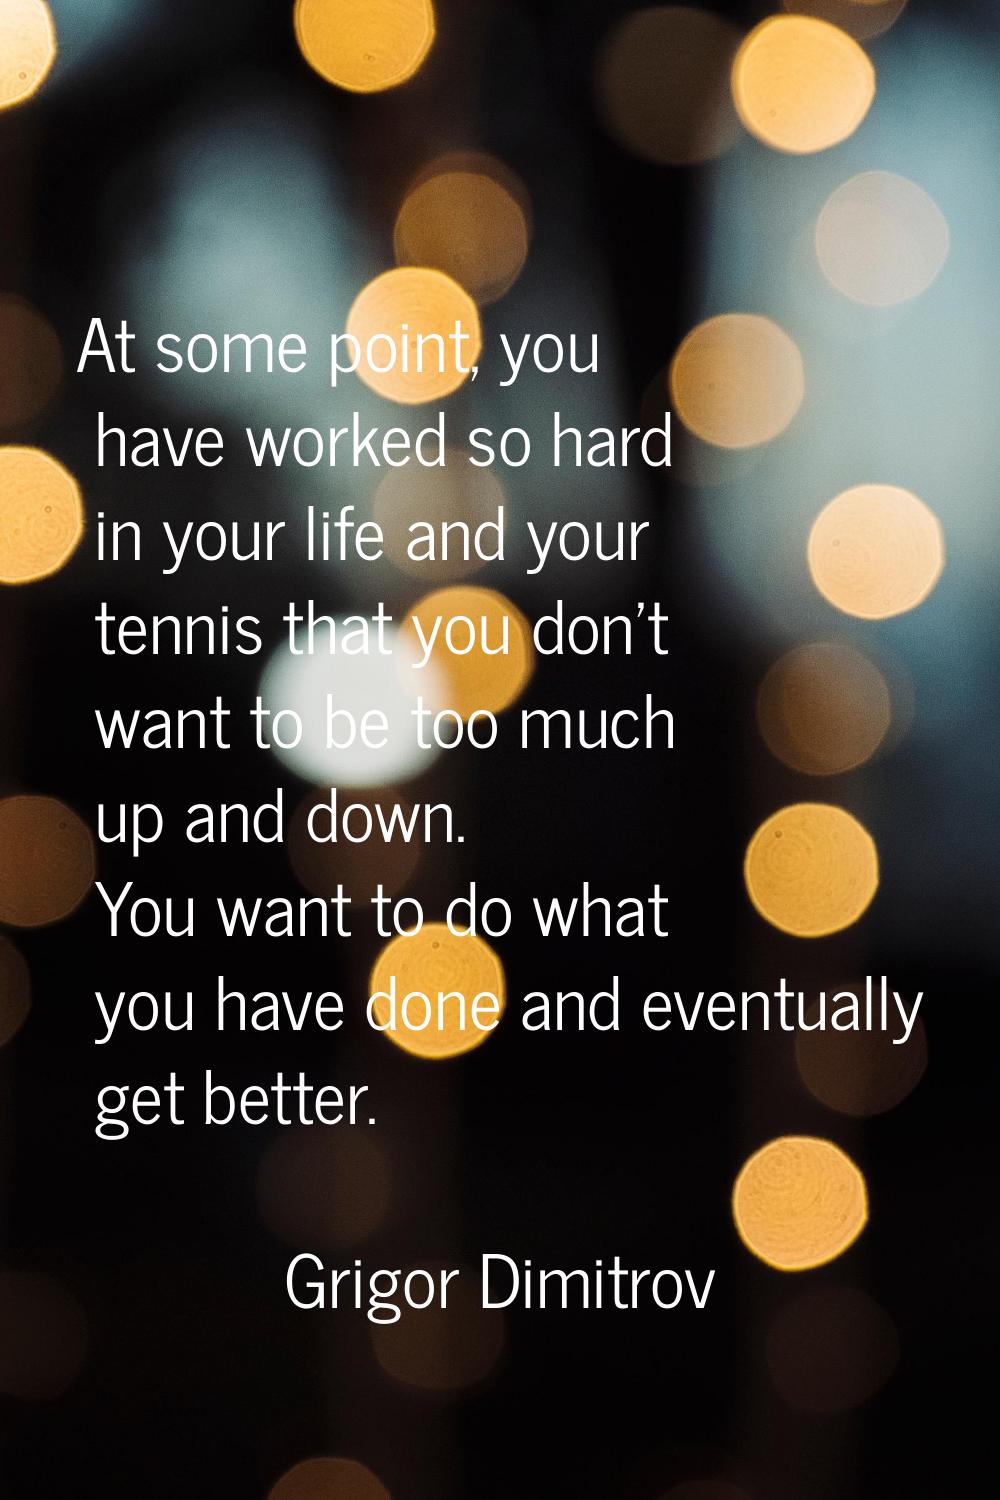 At some point, you have worked so hard in your life and your tennis that you don't want to be too m